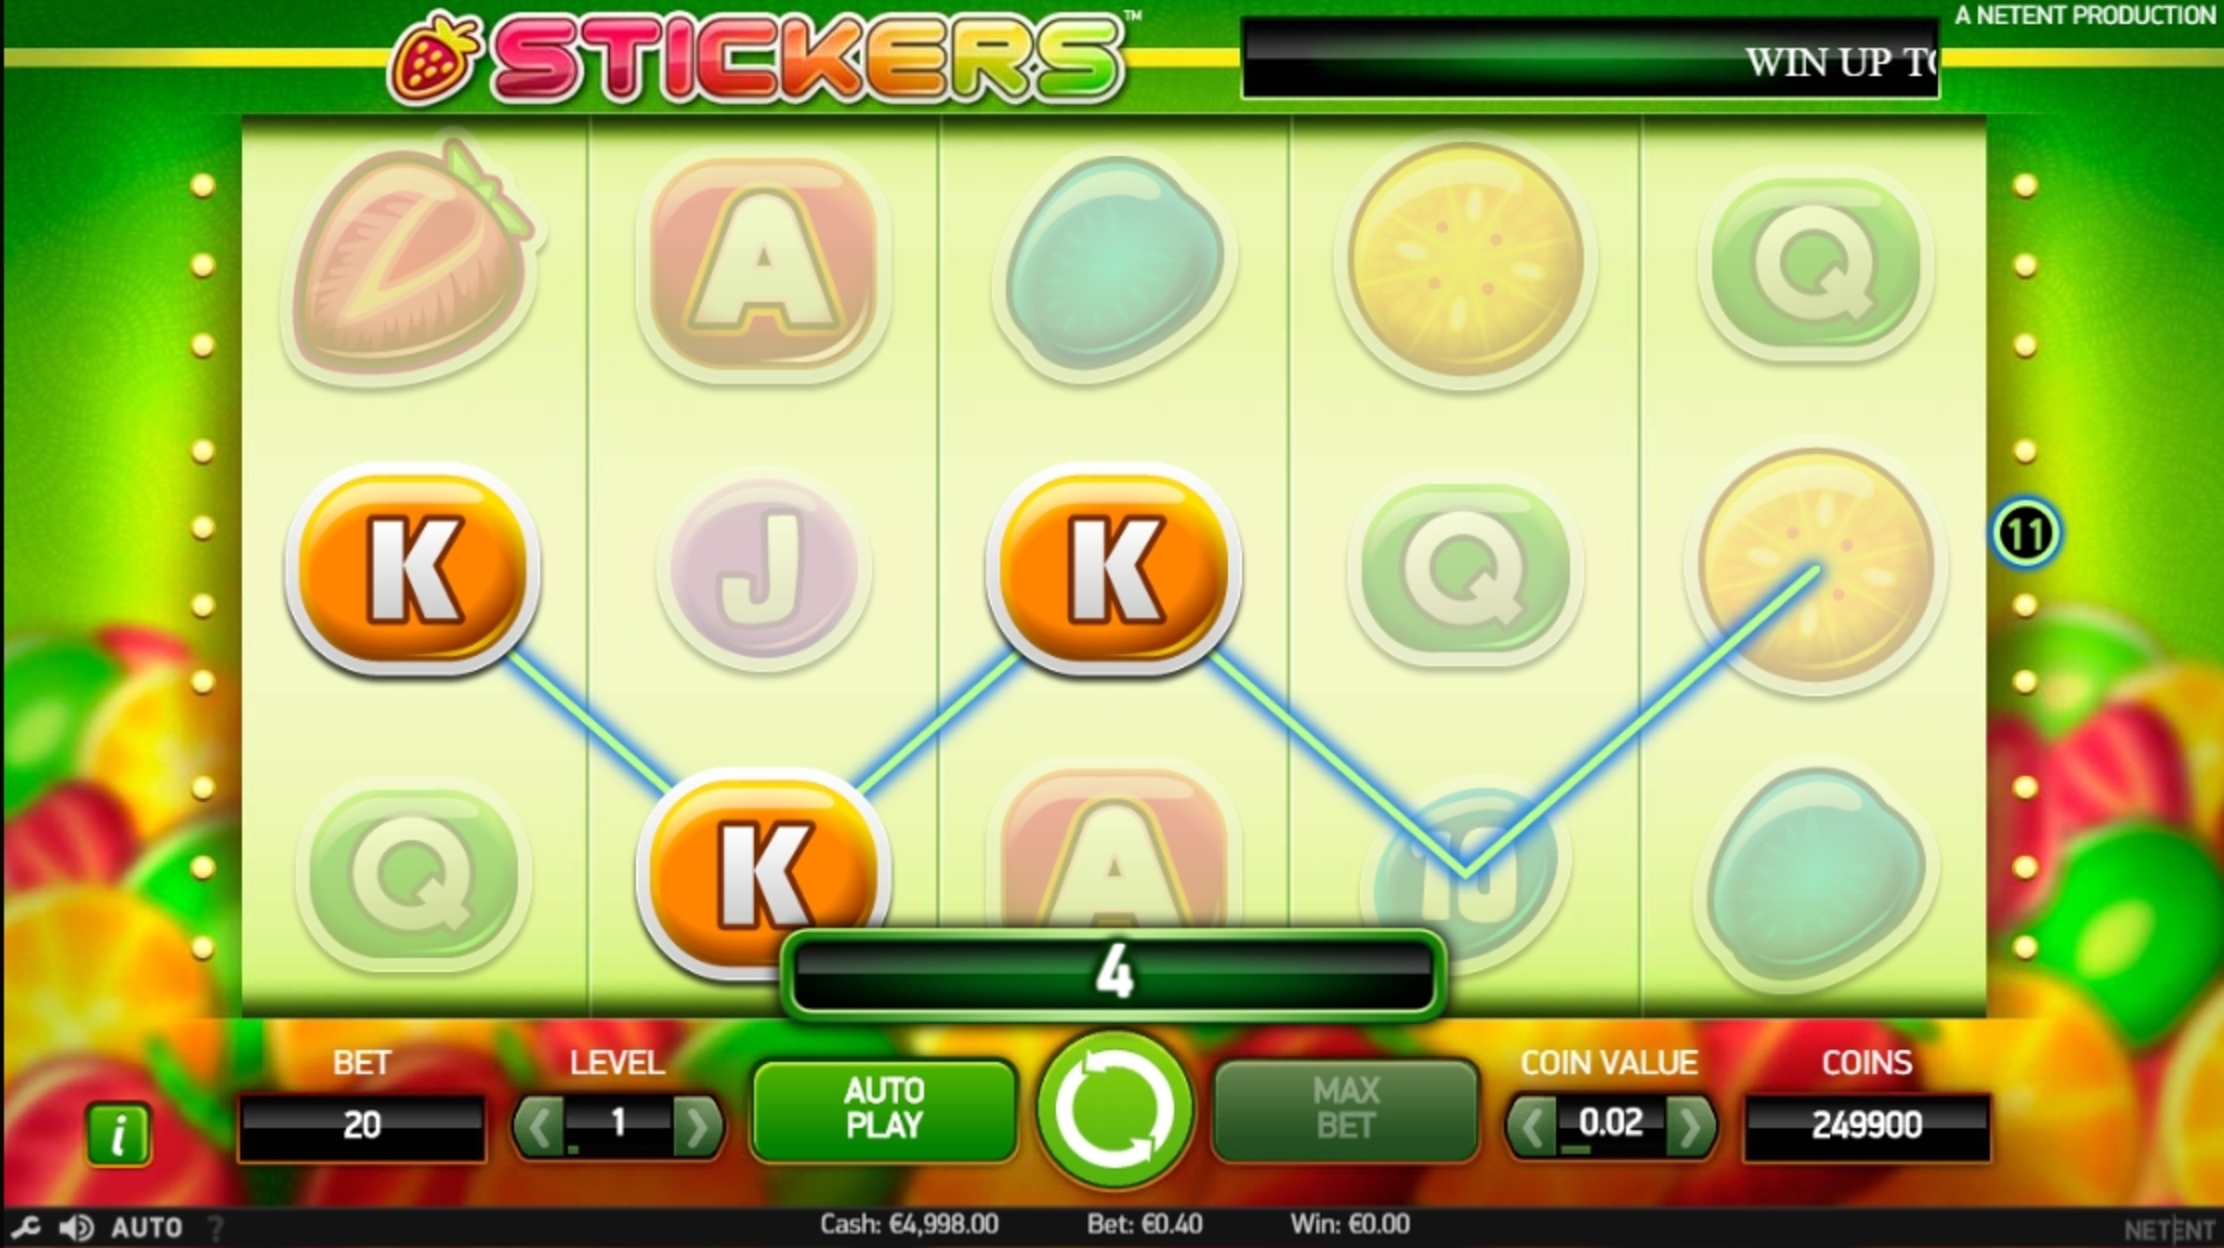 Win Money in Stickers Free Slot Game by NetEnt